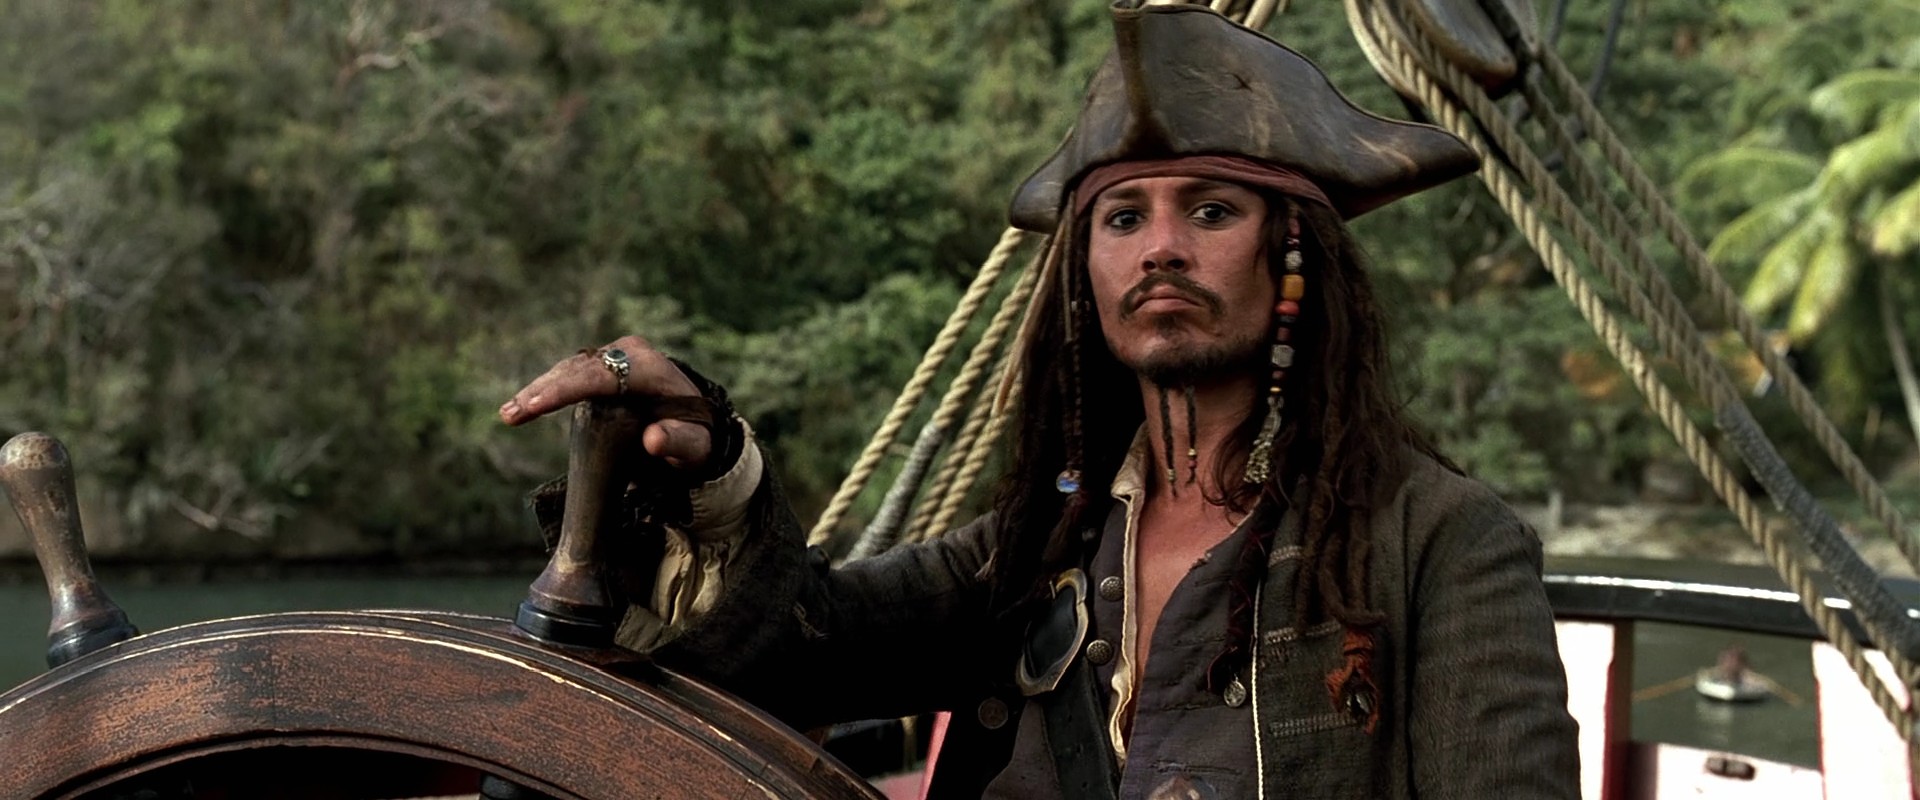 HQ Pirates Of The Caribbean: The Curse Of The Black Pearl Wallpapers | File 289.64Kb